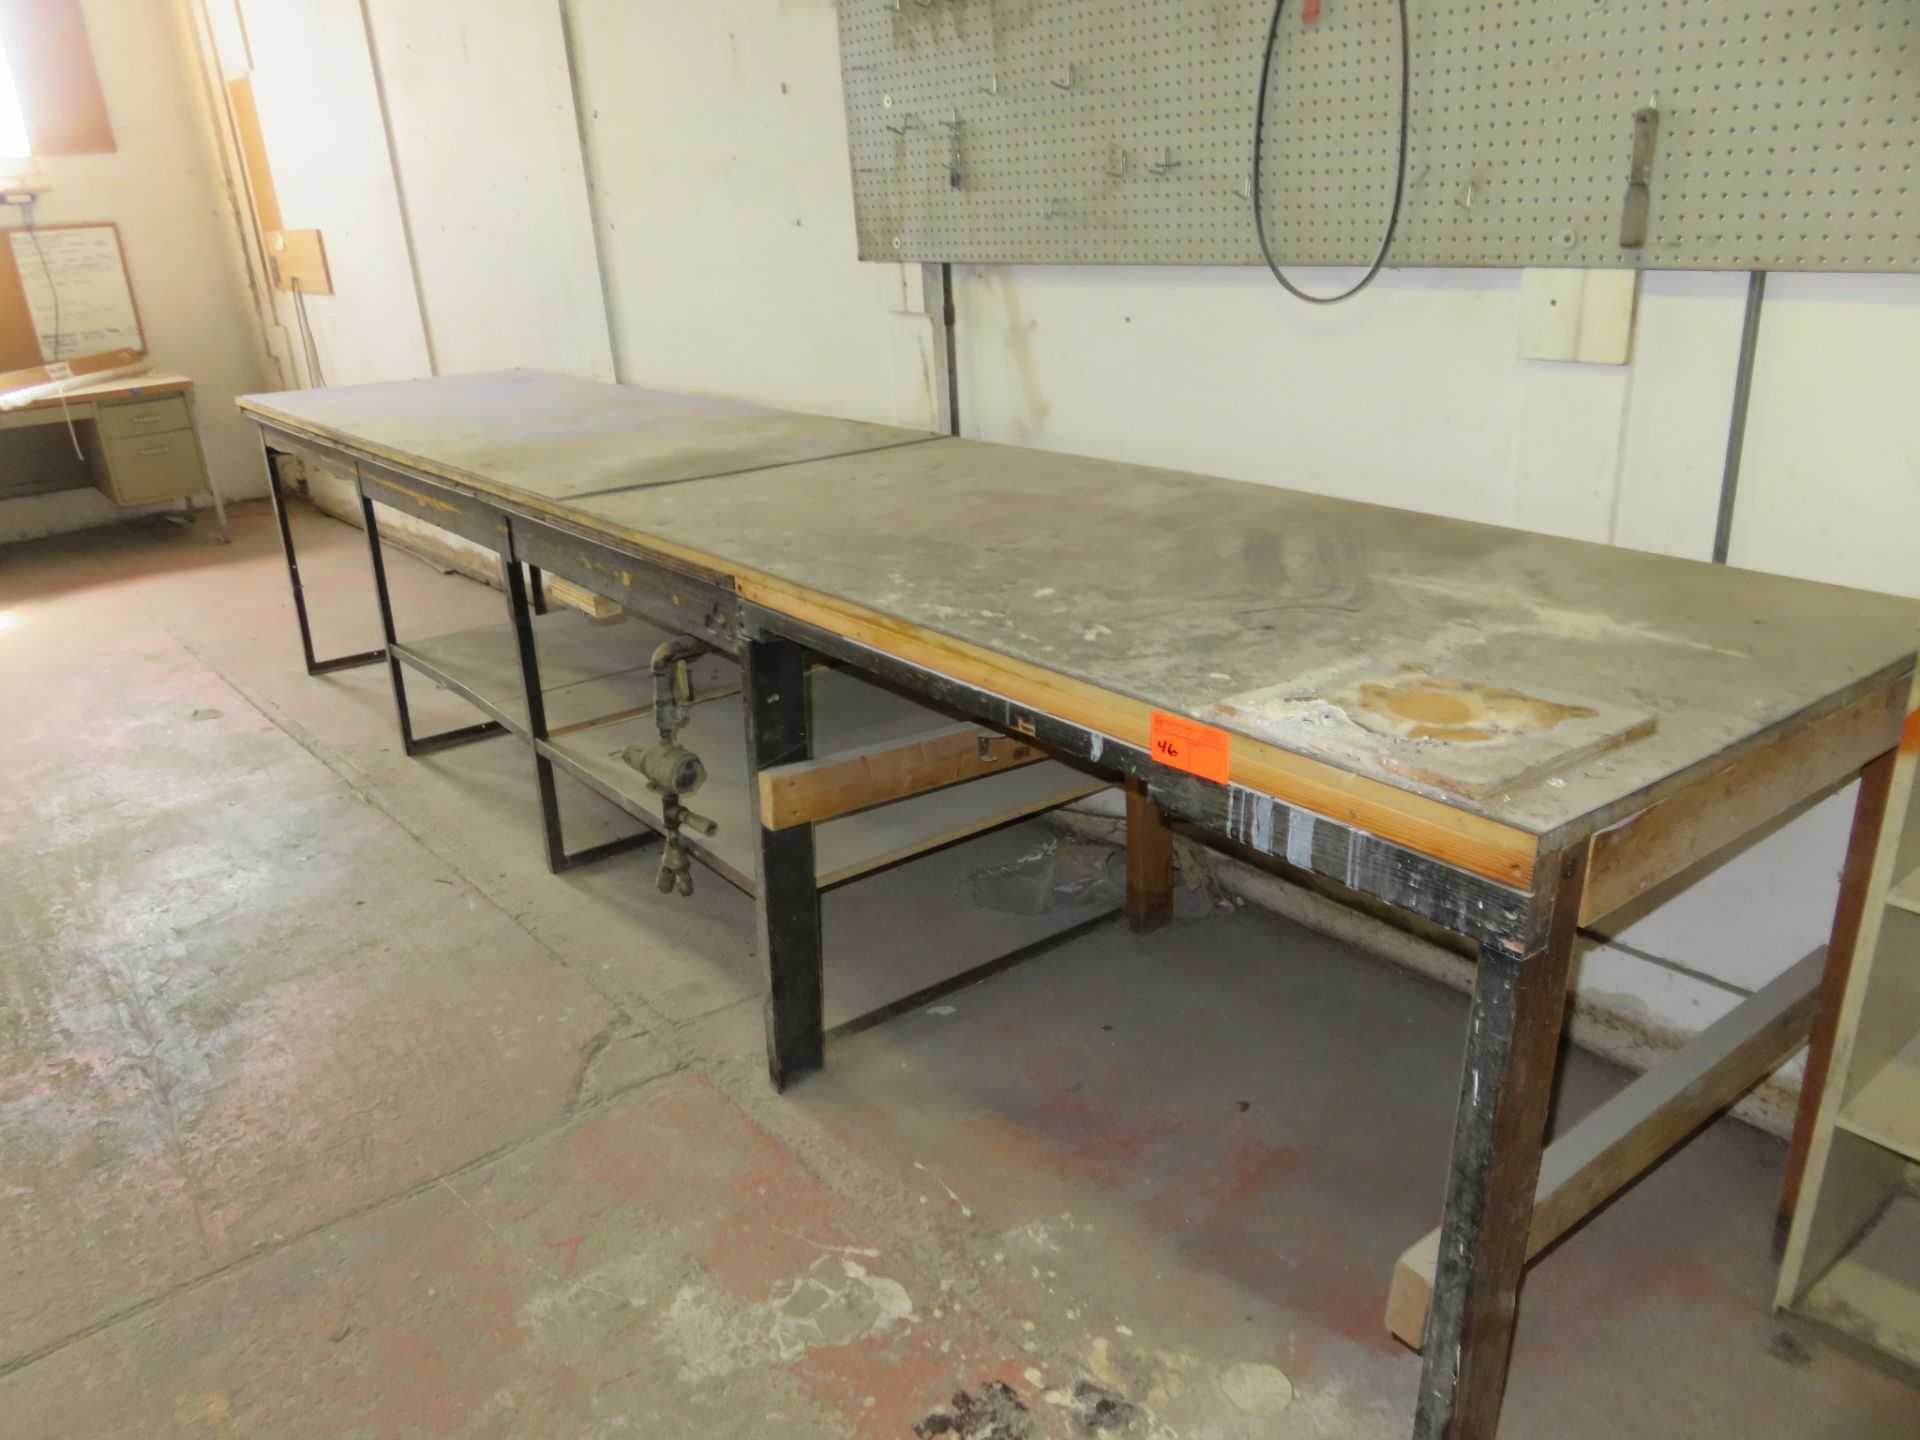 Lot of Cubed Storage Shelving approx 96"x 14" x 72" & Custom Work Table approx 172"x 36"x 35" - Image 3 of 3